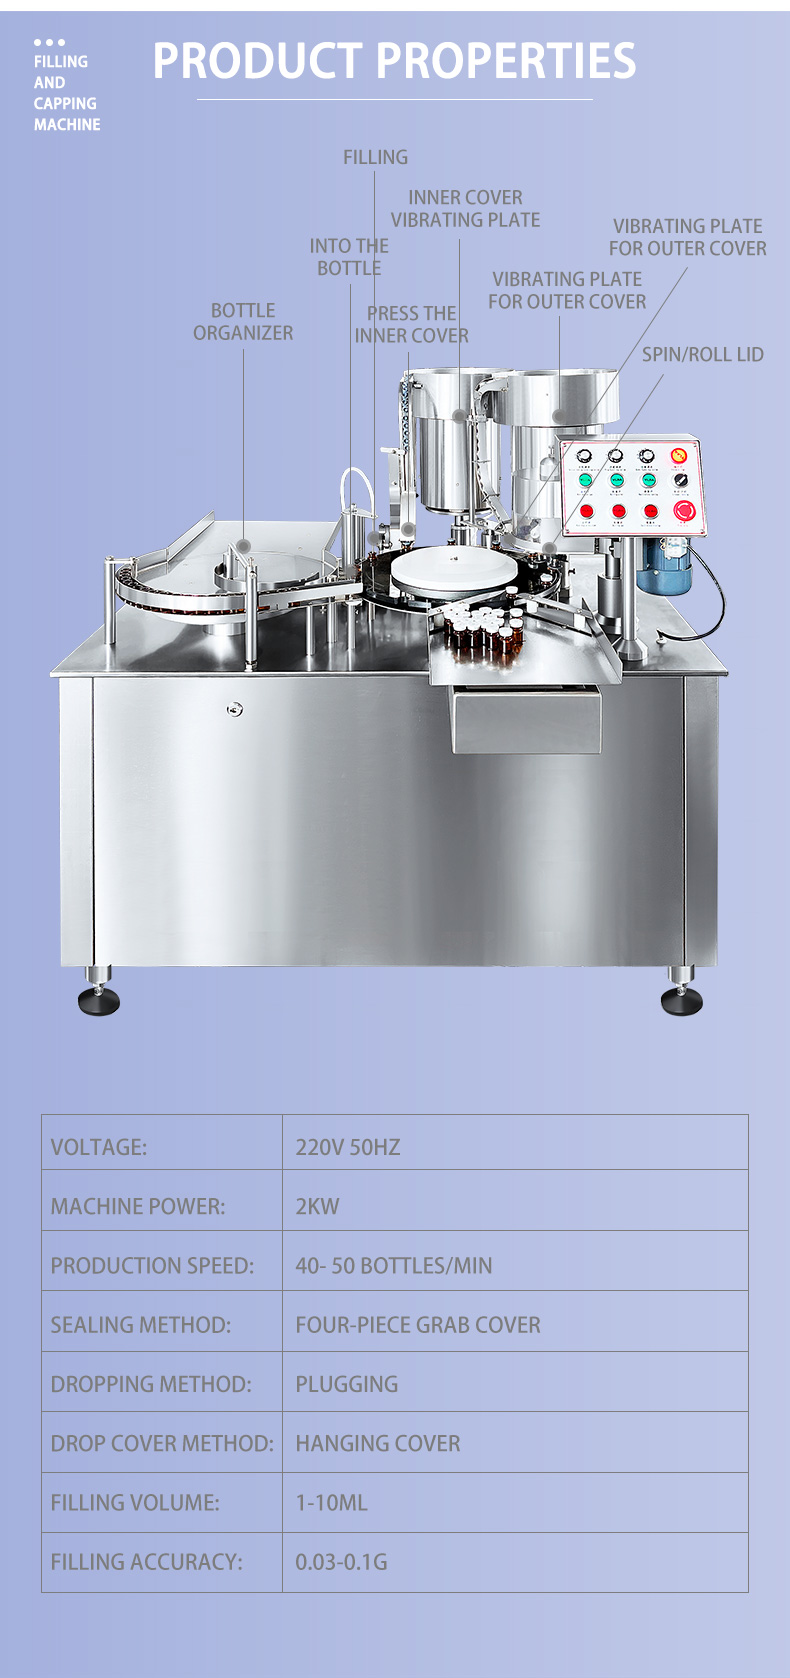 Pharmaceutical Injection Vial Filling Machine, Automatic Vial Filling Plugging and Sealing Machine for 7-100ml Aseptic Vial